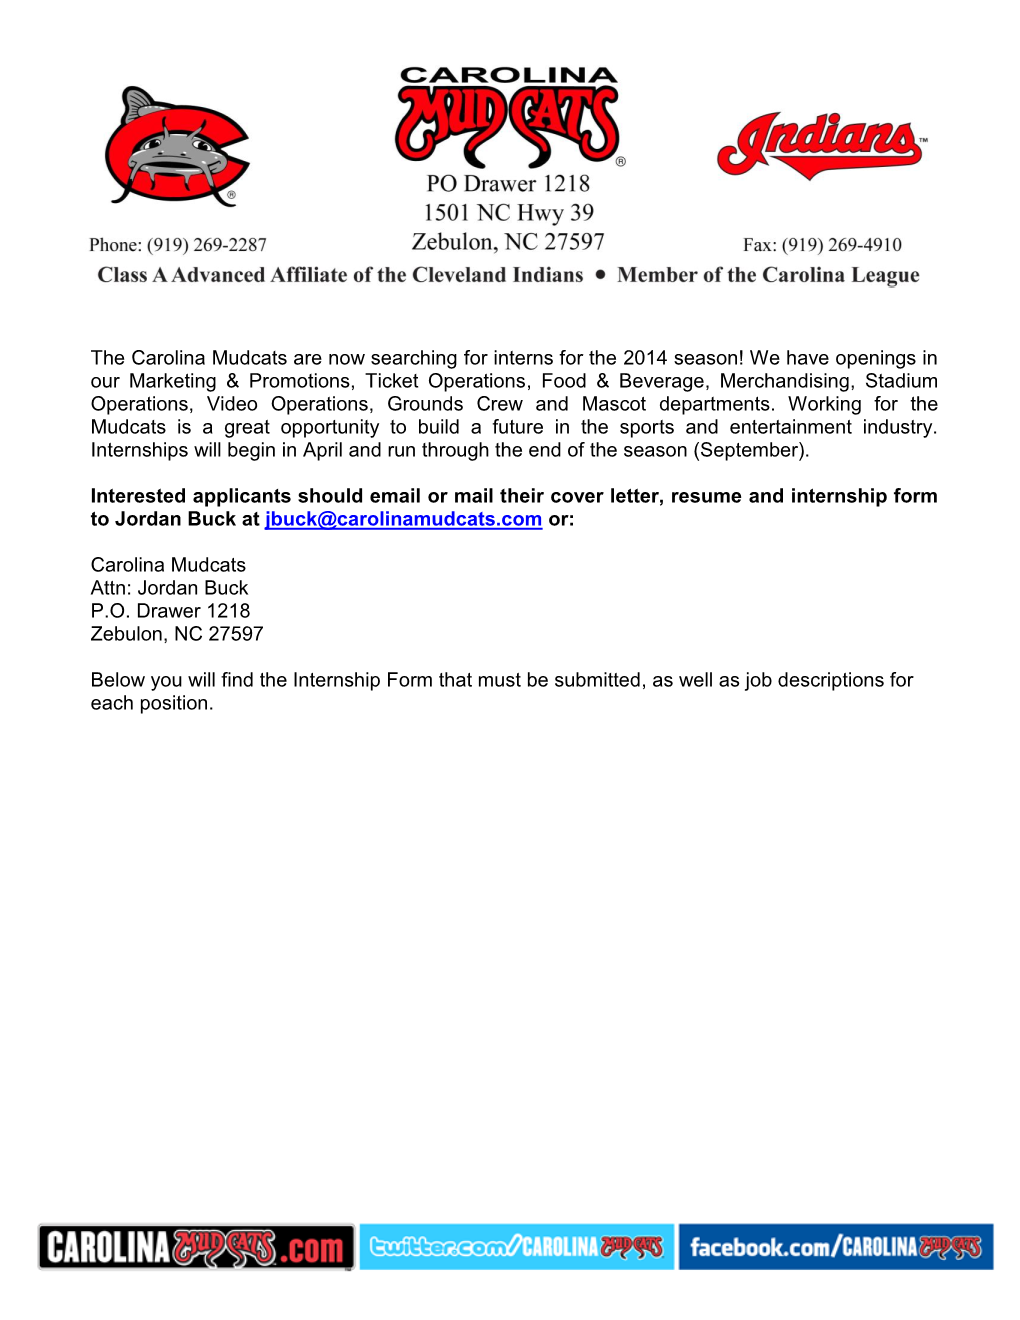 The Carolina Mudcats Are Now Searching for Interns for the 2014